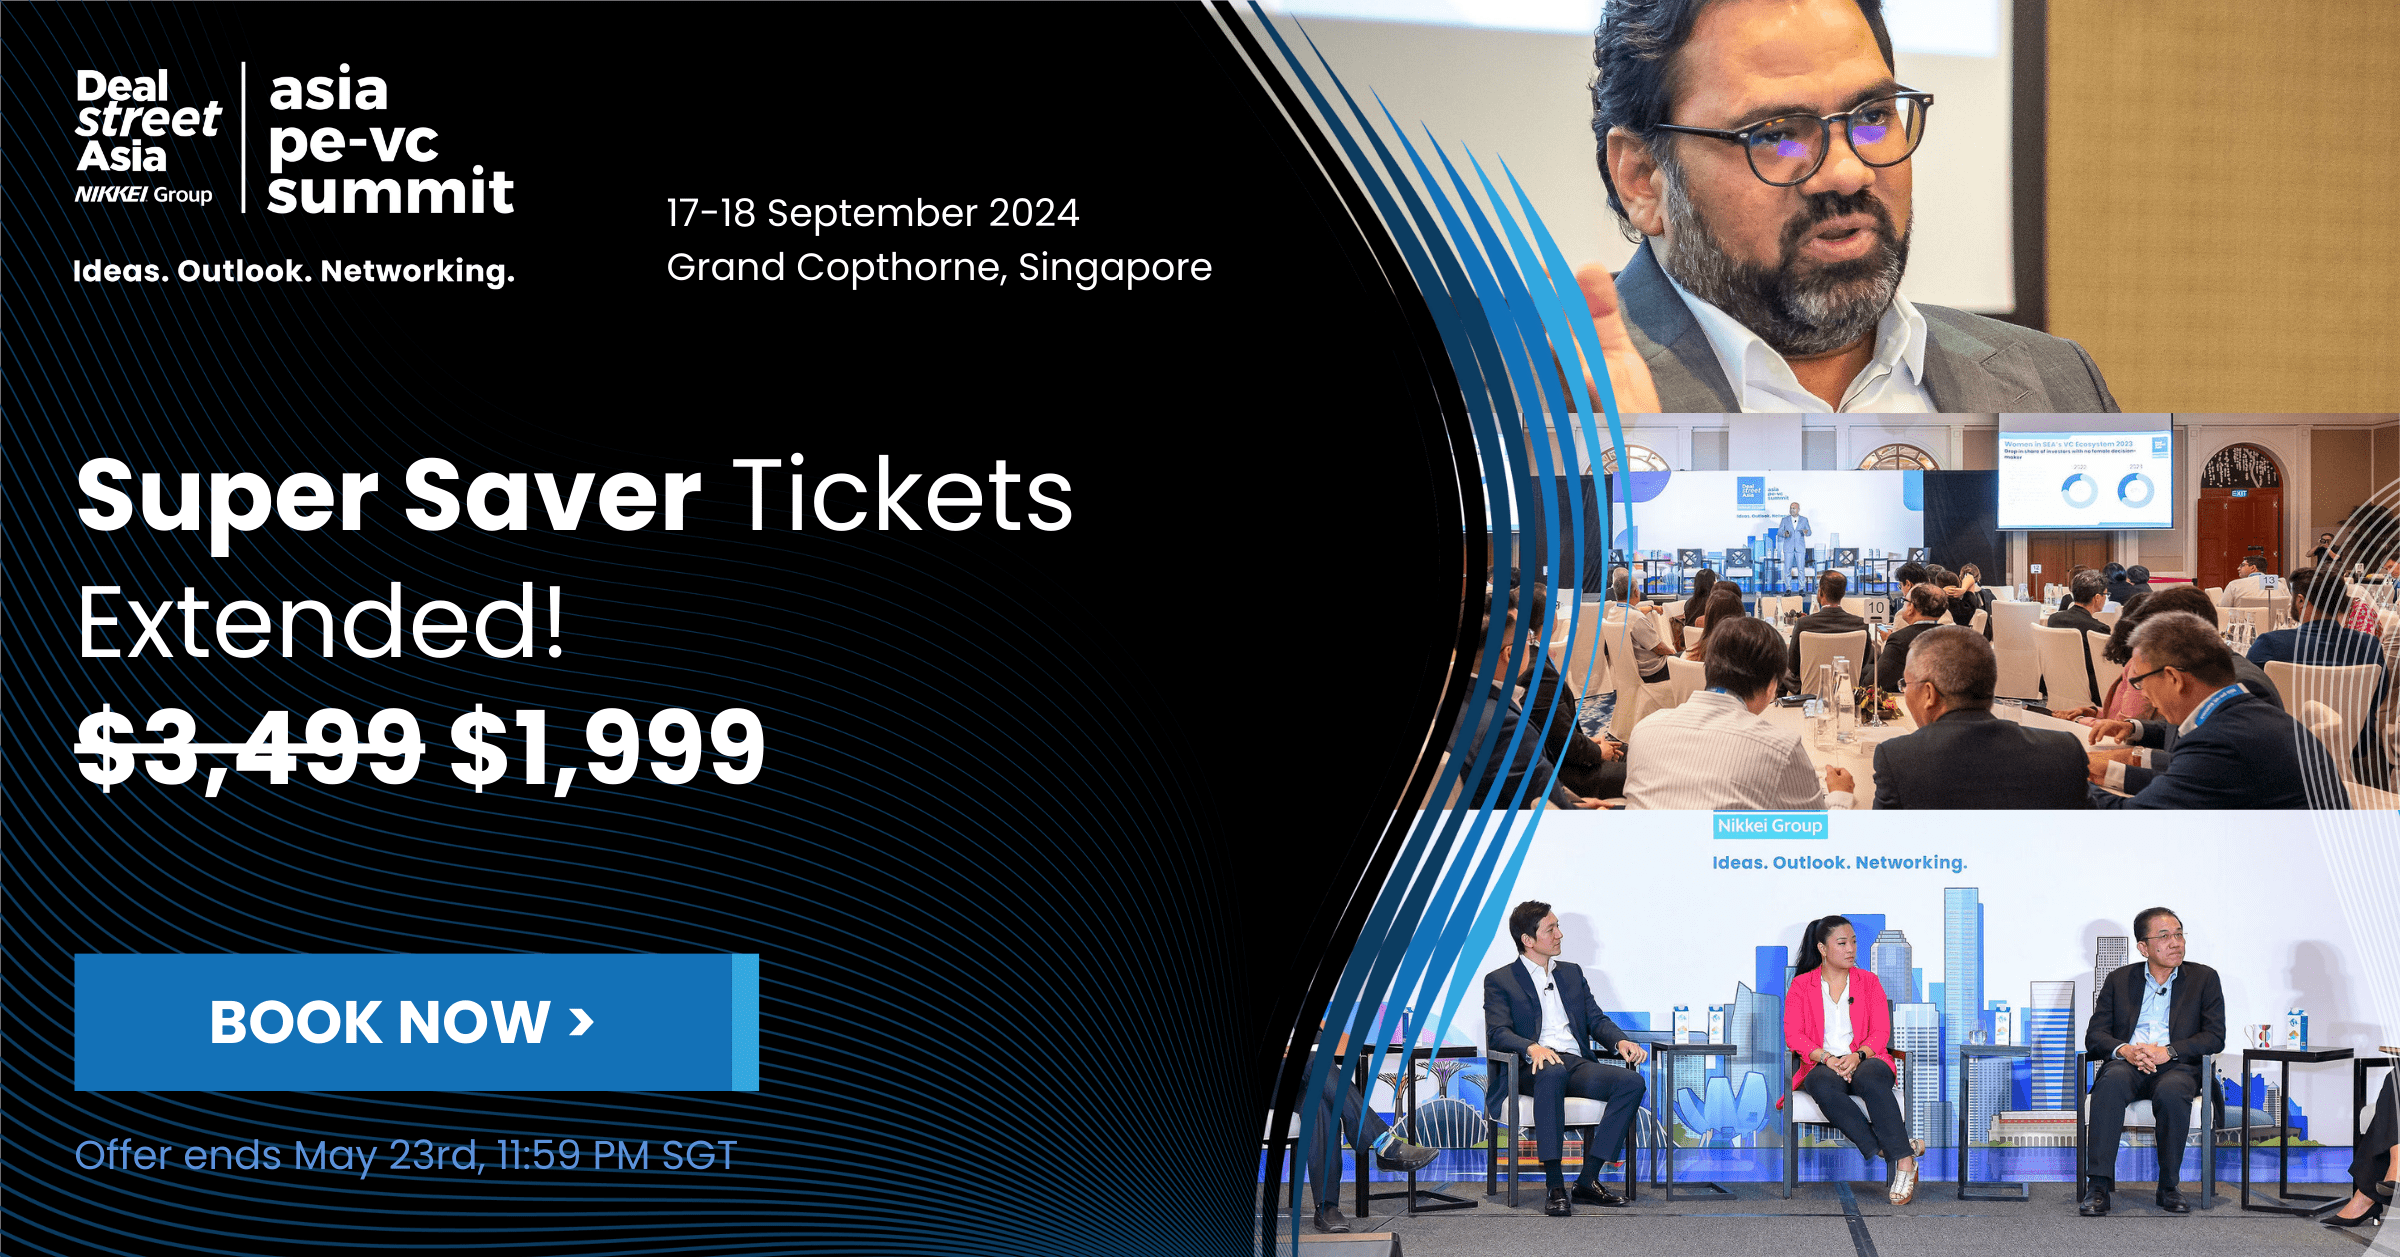 Meet 10 new speakers at Asia PE-VC Summit 2024 - Super Saver Tickets Extended!